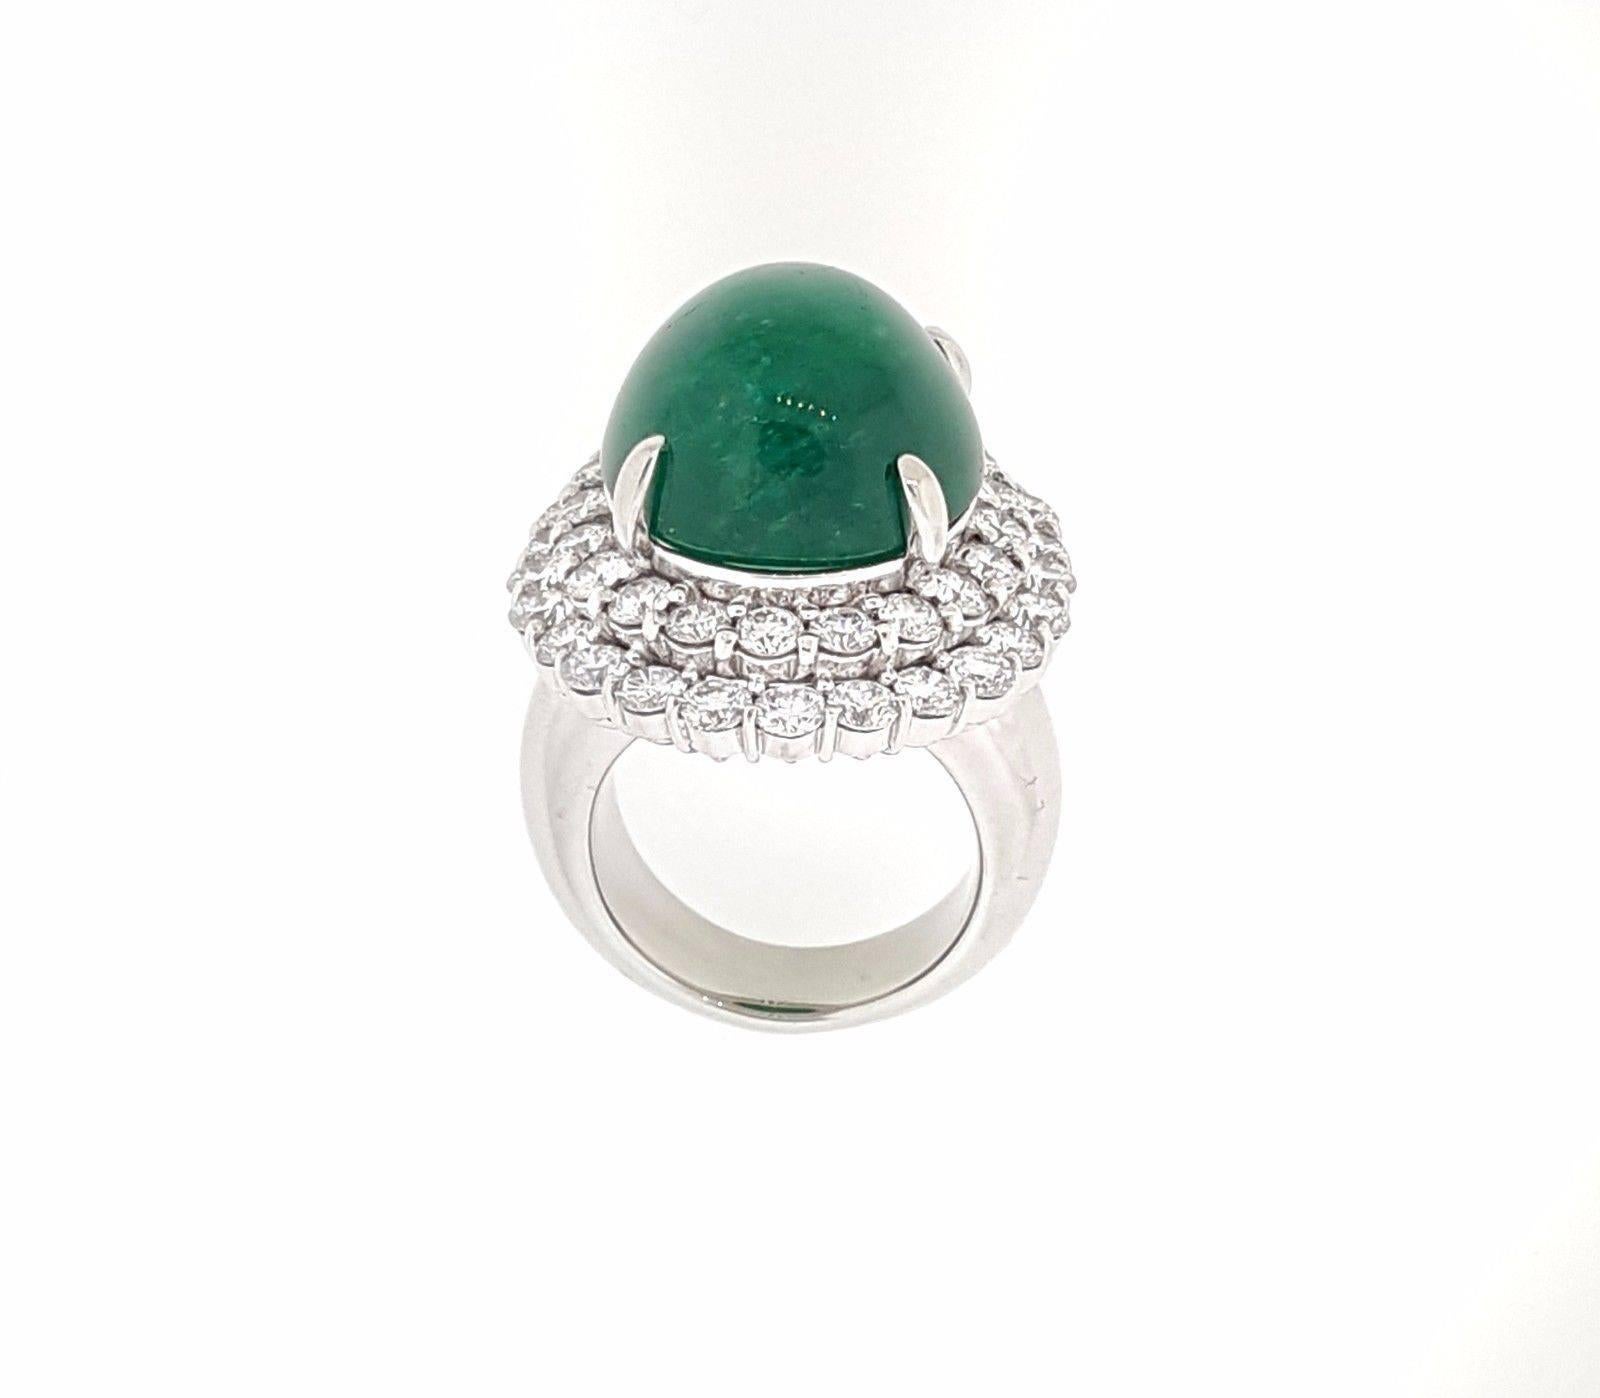 24 Carat Emerald Cabochon Ring with 4.50 Carat of Diamonds in Platinum For Sale 2